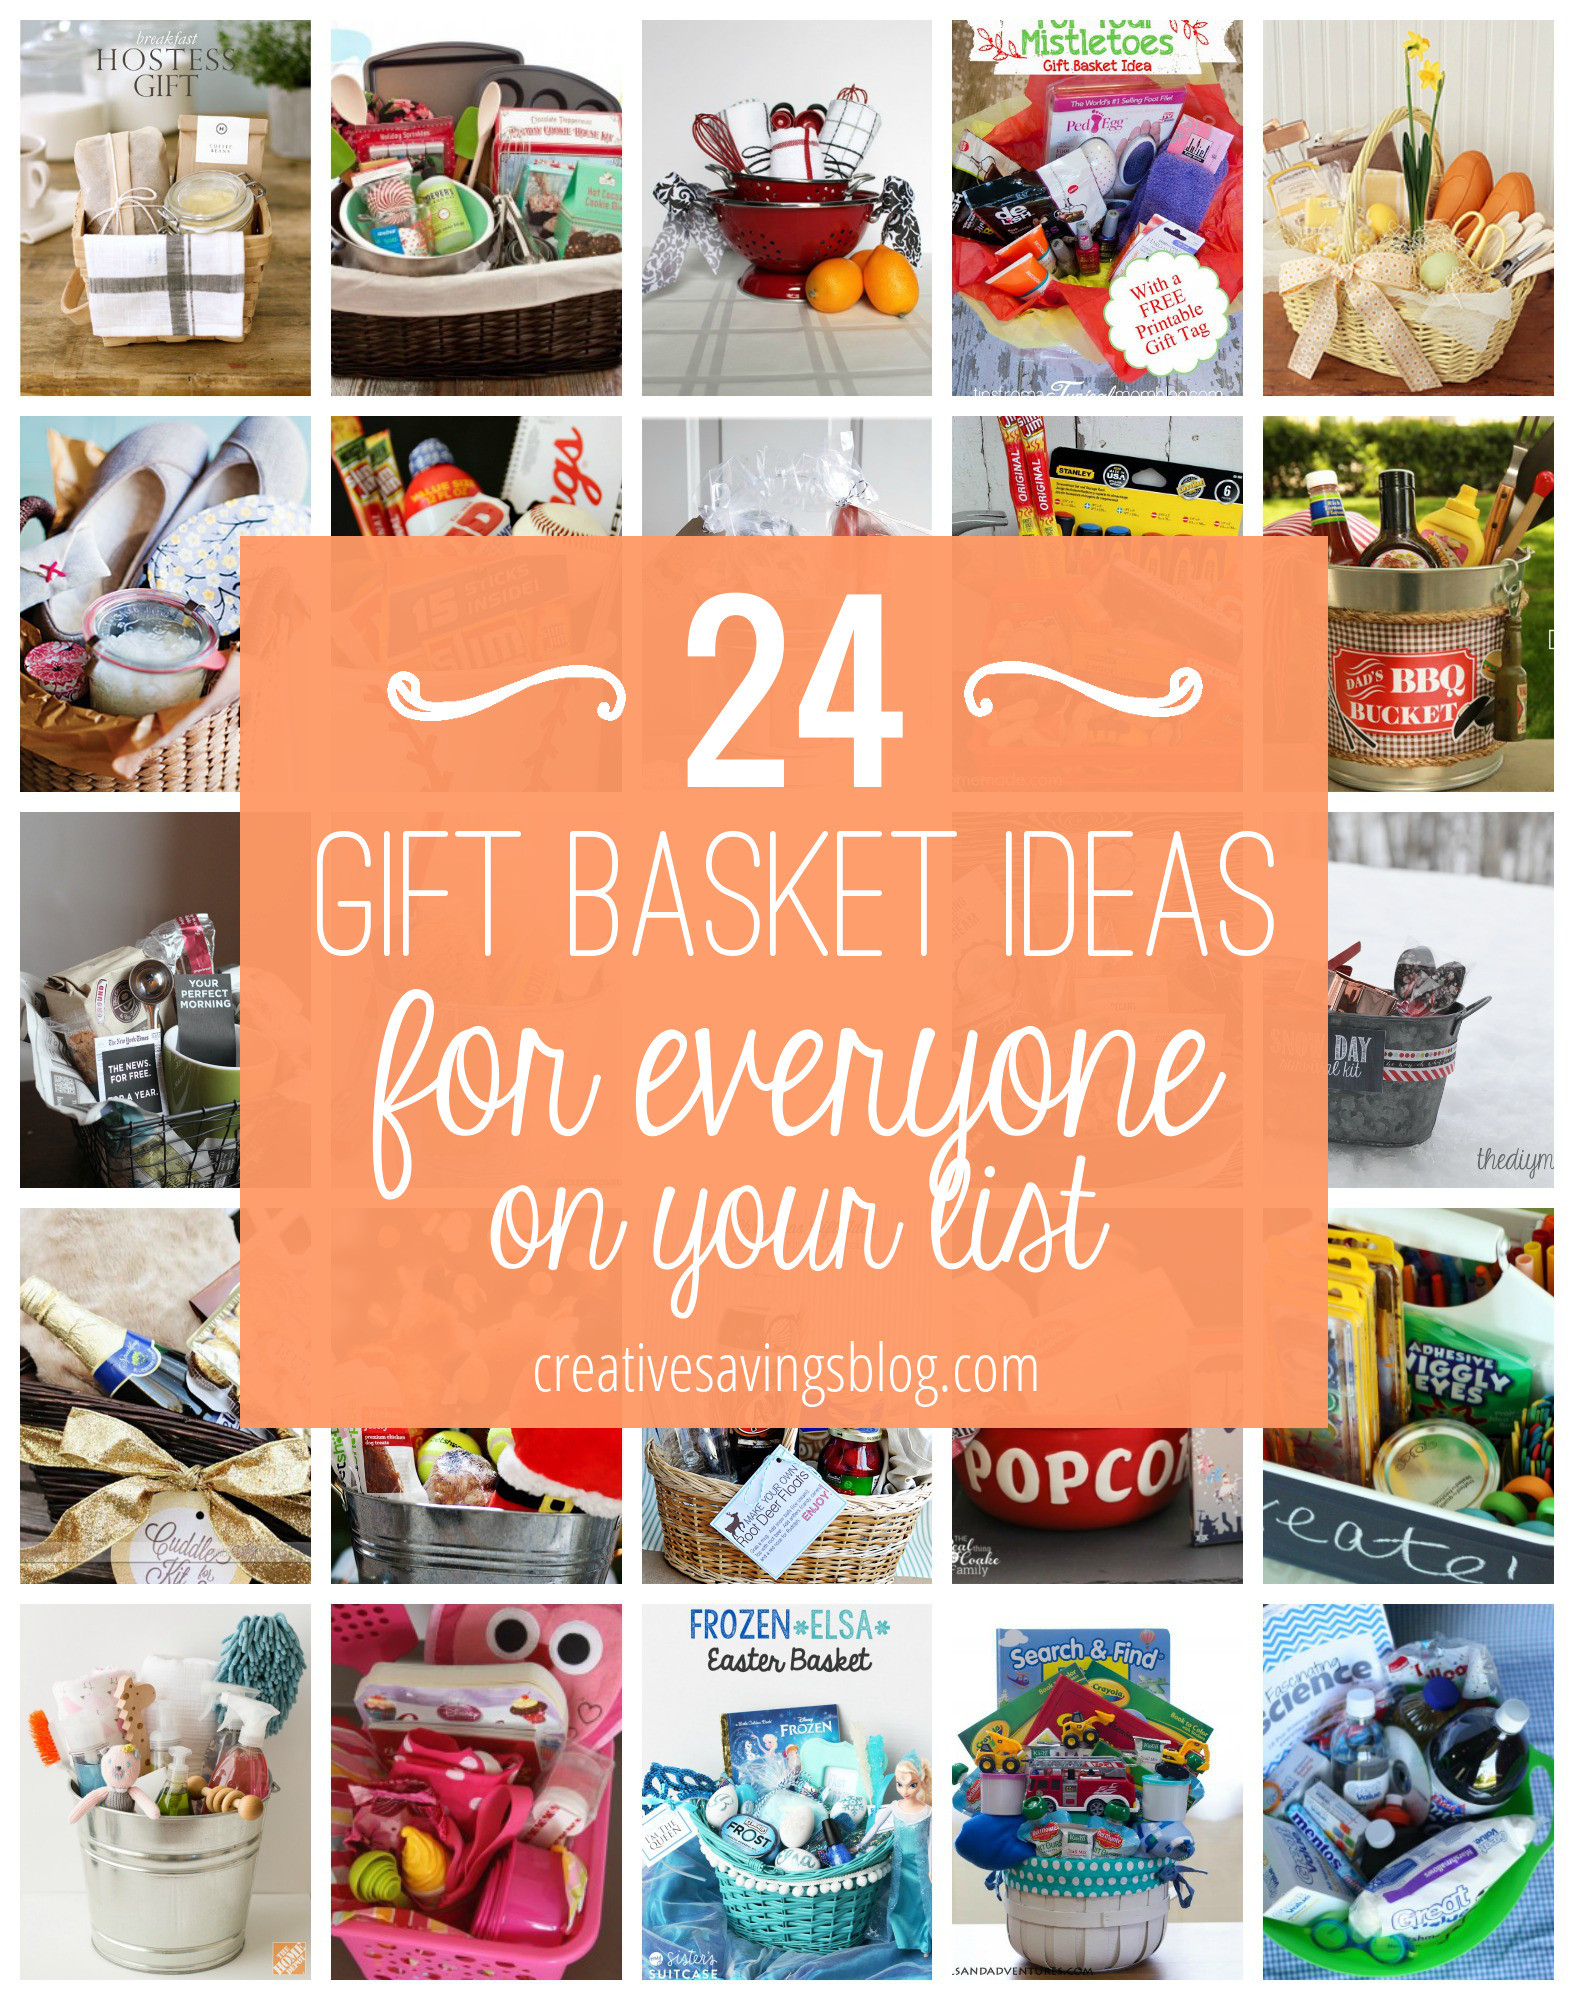 Family Themed Gift Basket Ideas
 DIY Gift Basket Ideas for Everyone on Your List